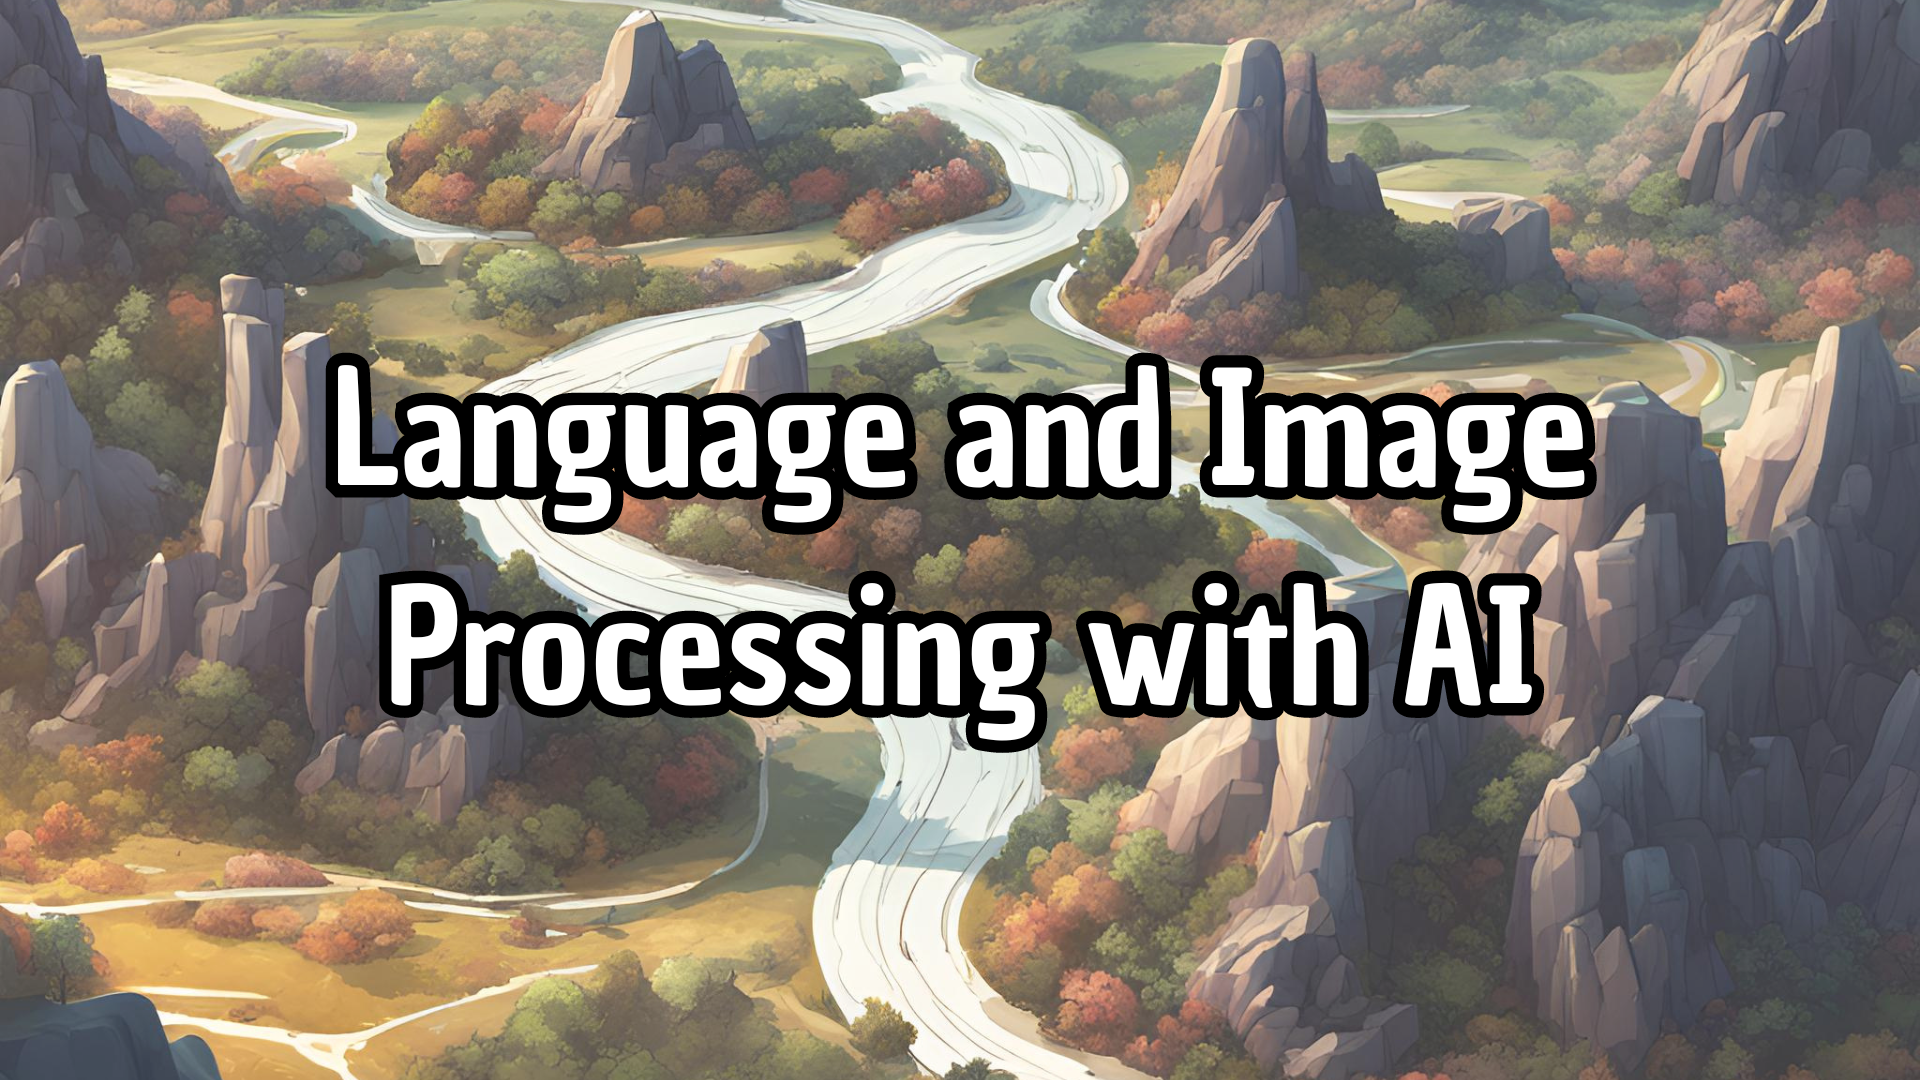 uploads/6762/language_and_image_processing_with_ai_(1).png